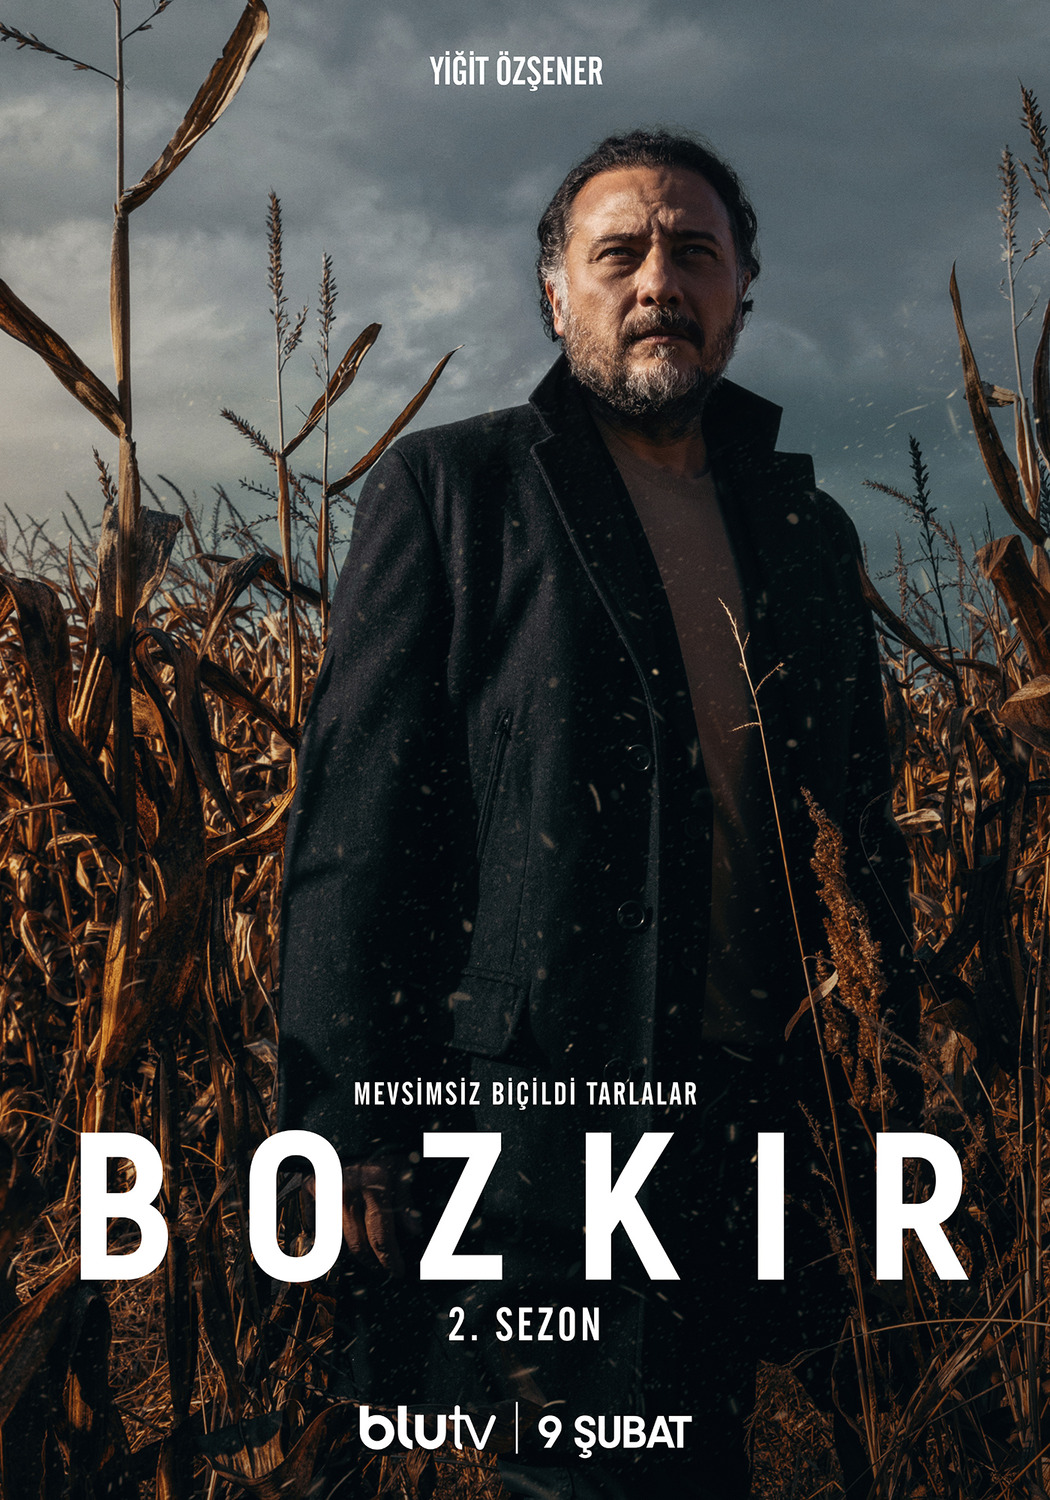 Extra Large TV Poster Image for Bozkir (#7 of 10)